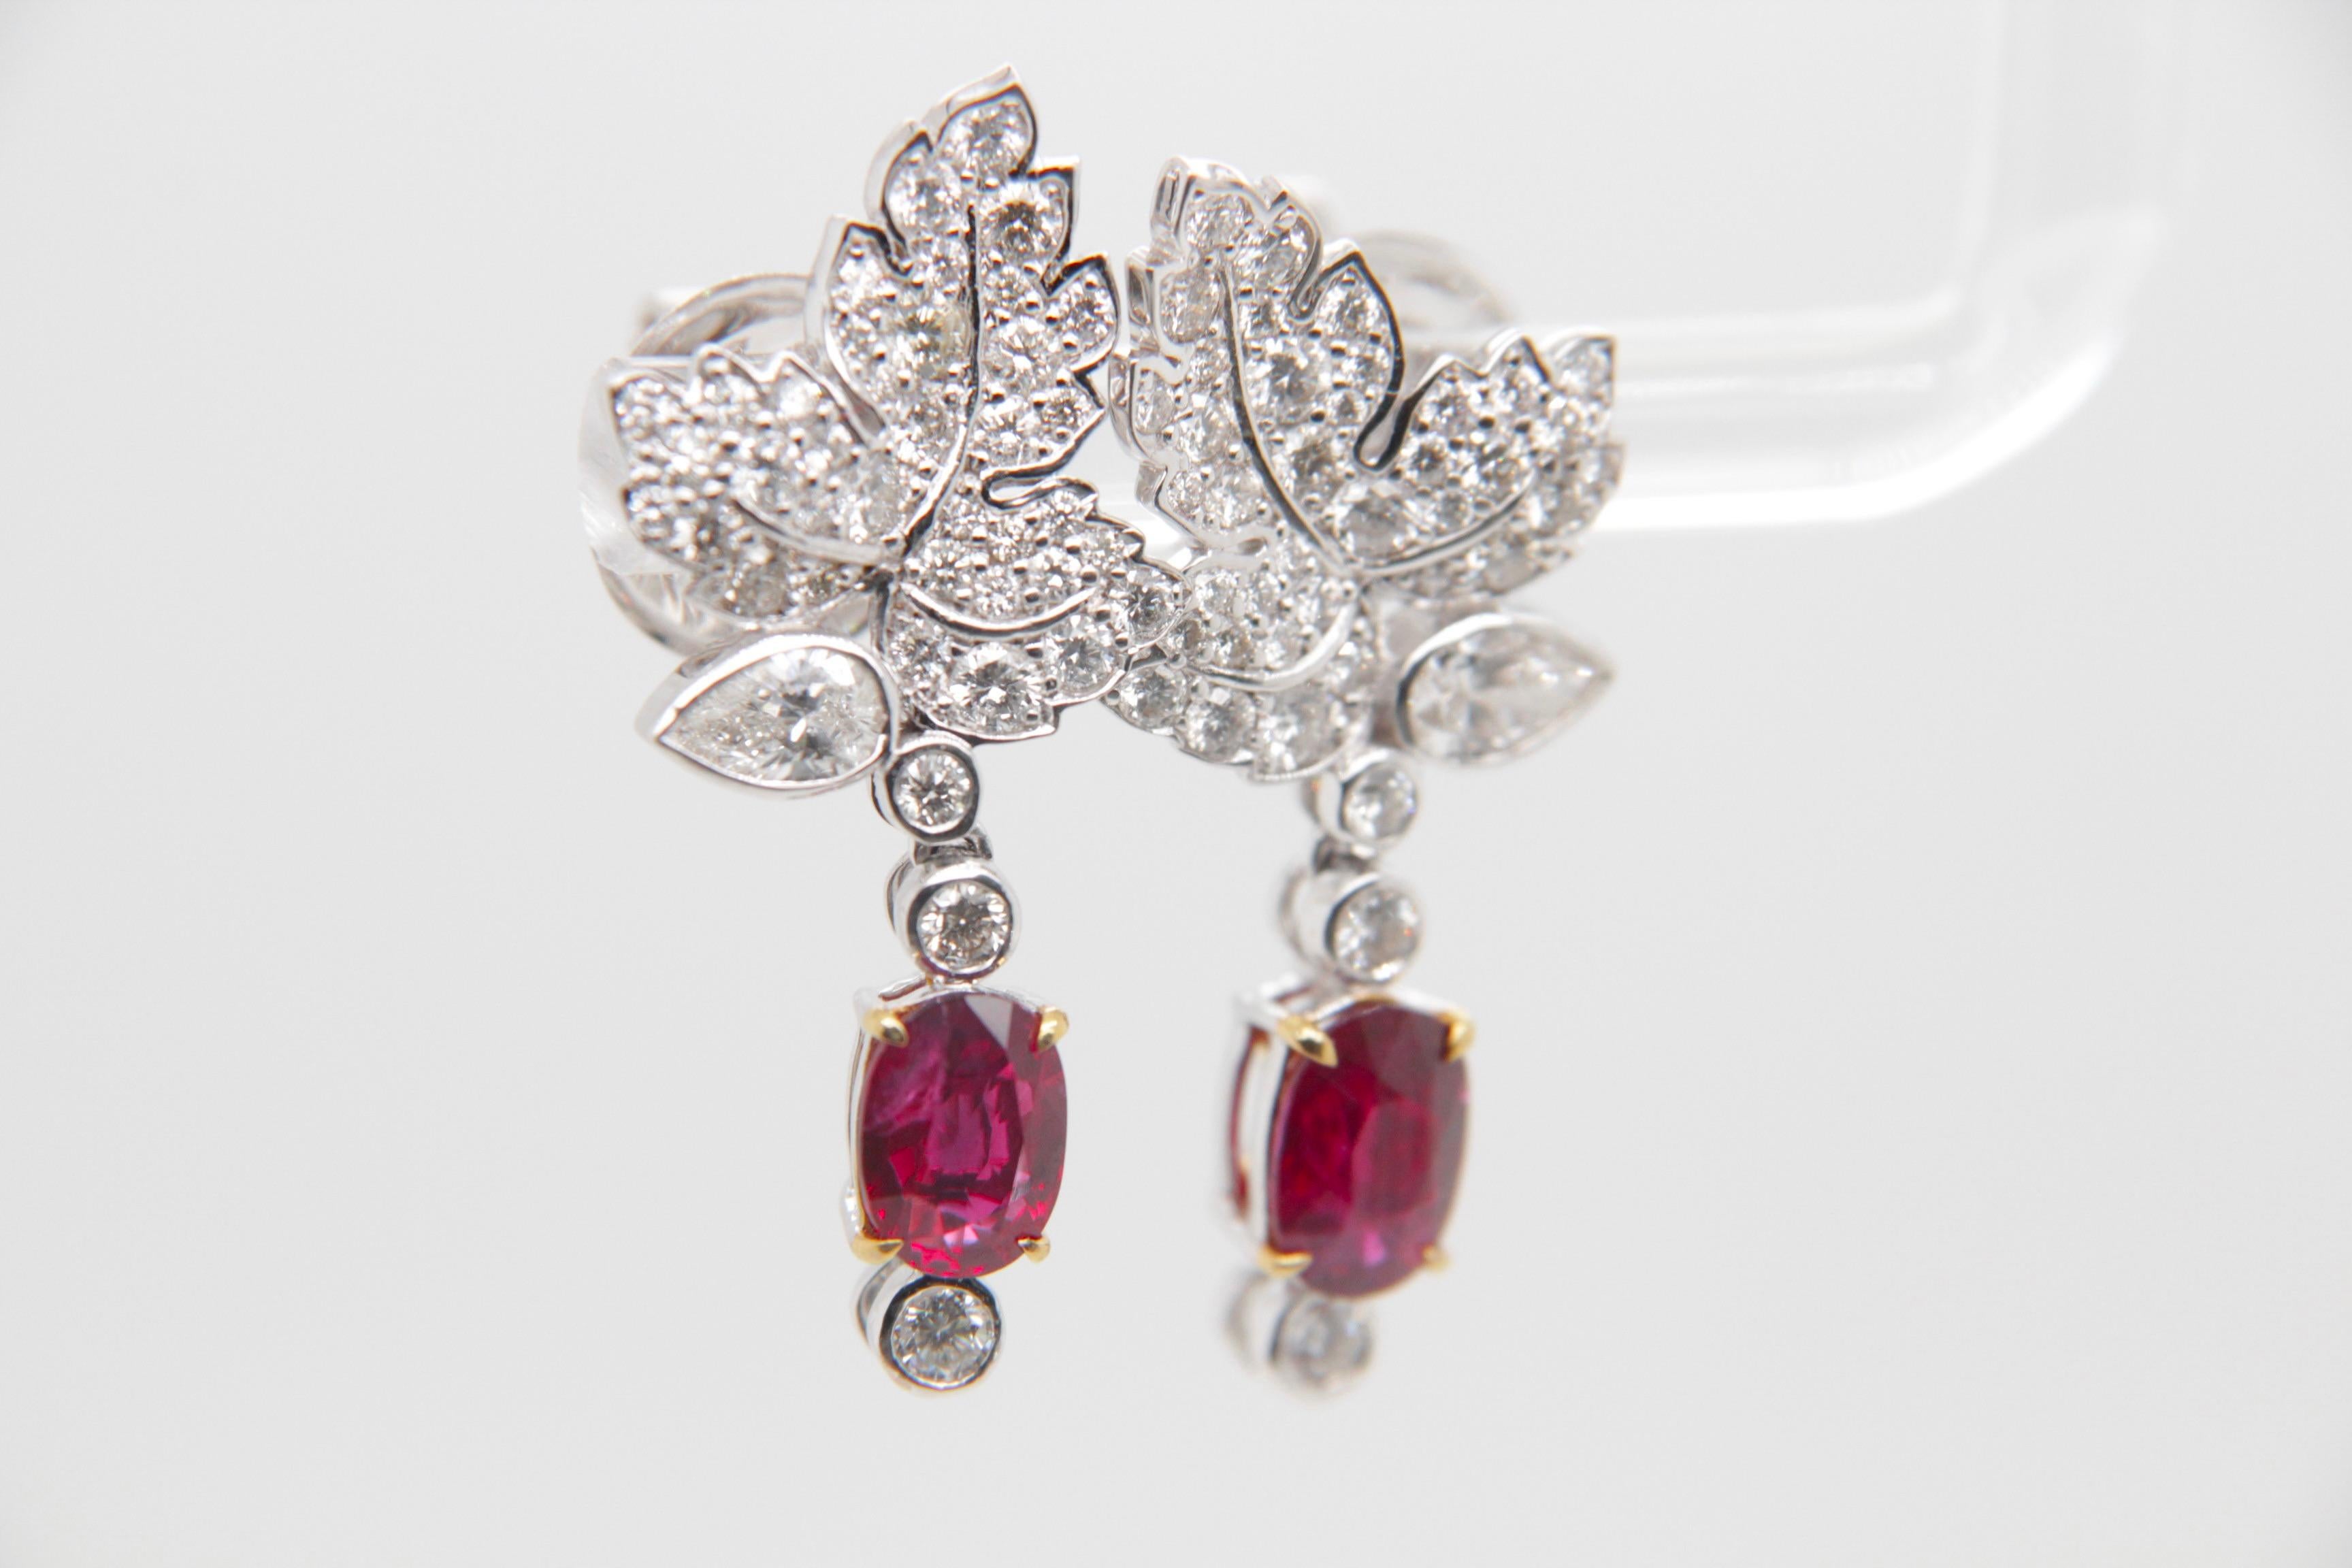 Presenting an enchanting creation from Rewa Jewelry, these ruby and diamond earrings seamlessly blend classic inspiration with contemporary elegance—a true masterpiece that reflects the brand's commitment to exceptional craftsmanship and timeless